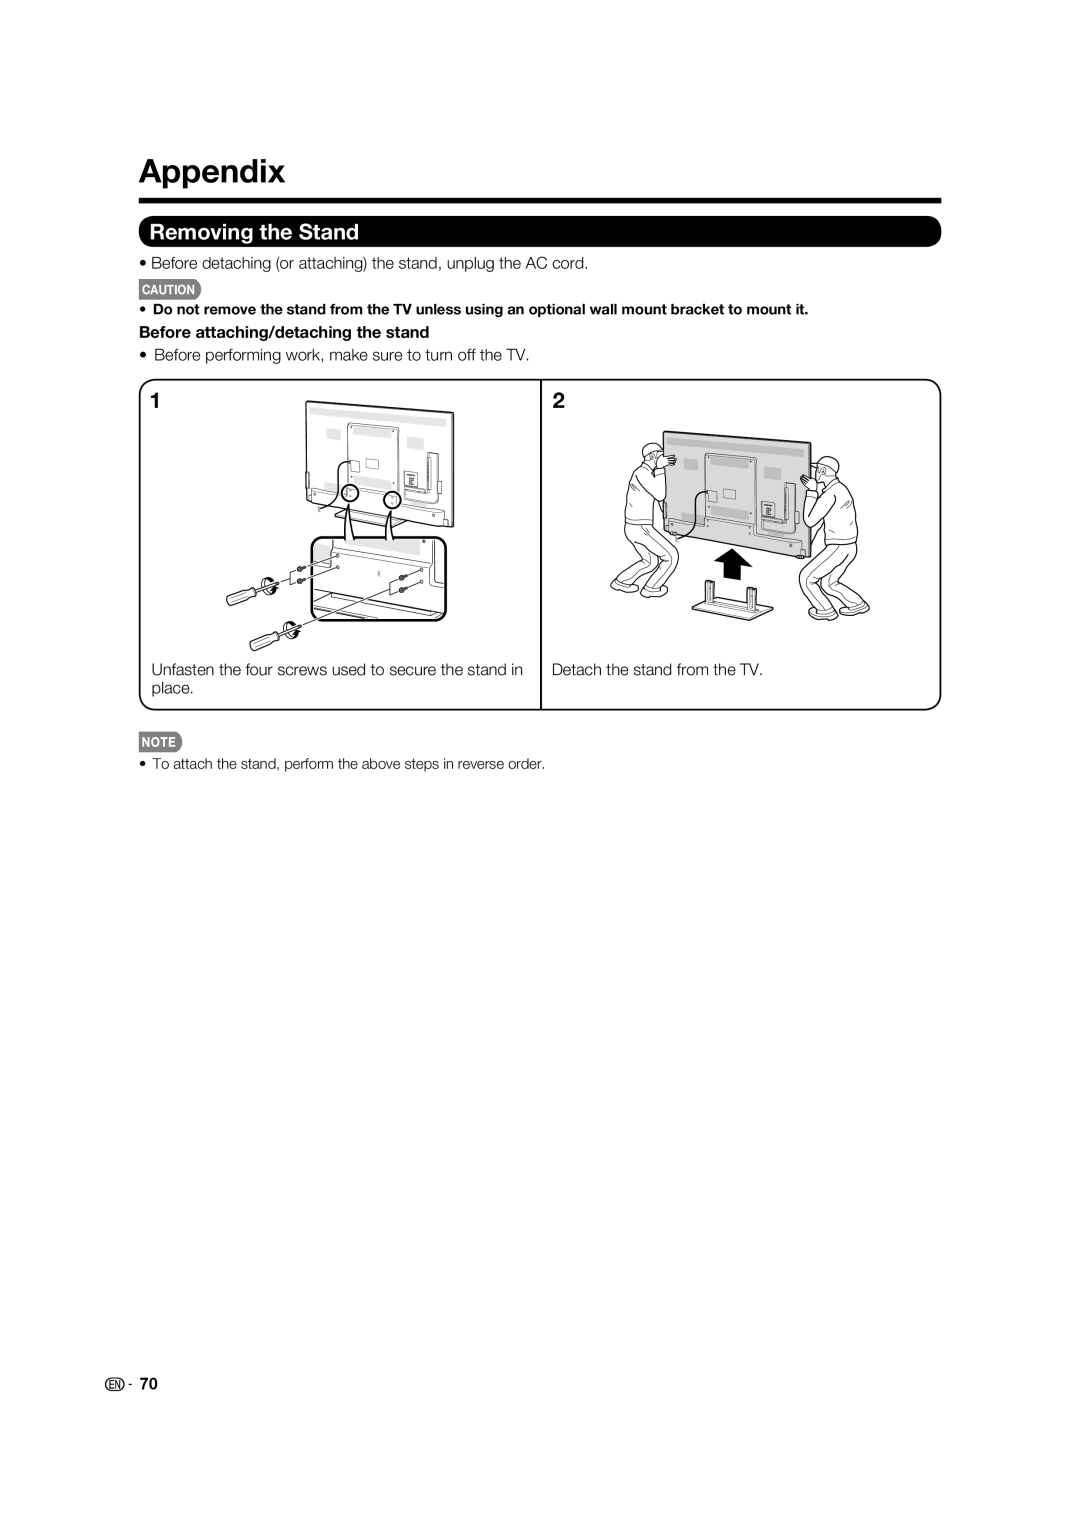 Sharp LC-70LE732U, LC-60LE632U operation manual Appendix, Removing the Stand, Before attaching/detaching the stand 